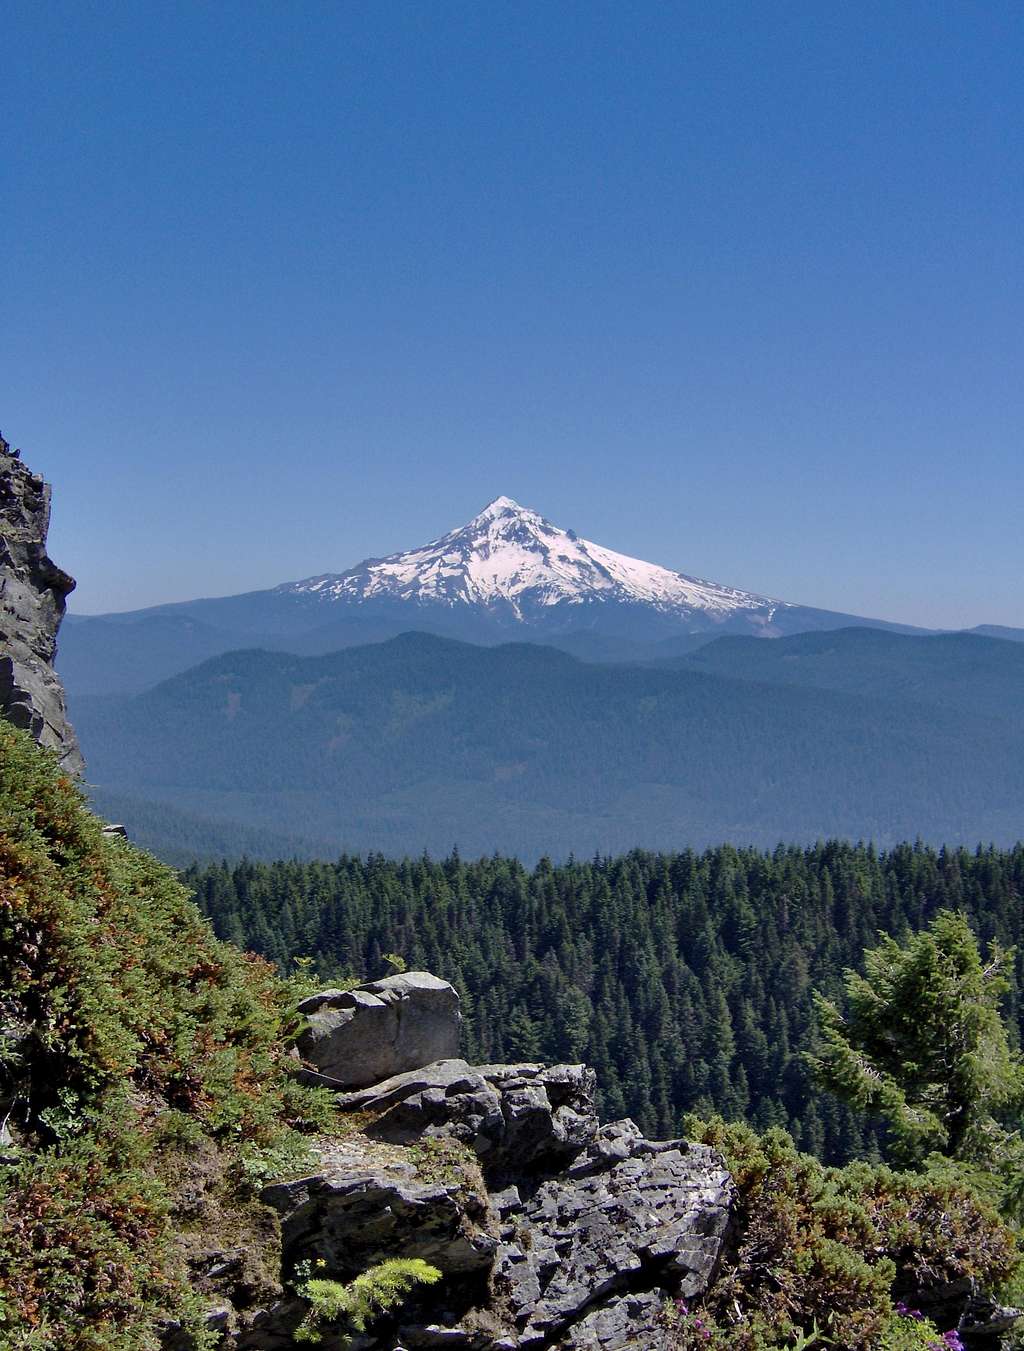 Mt. Hood from Larch Mountain